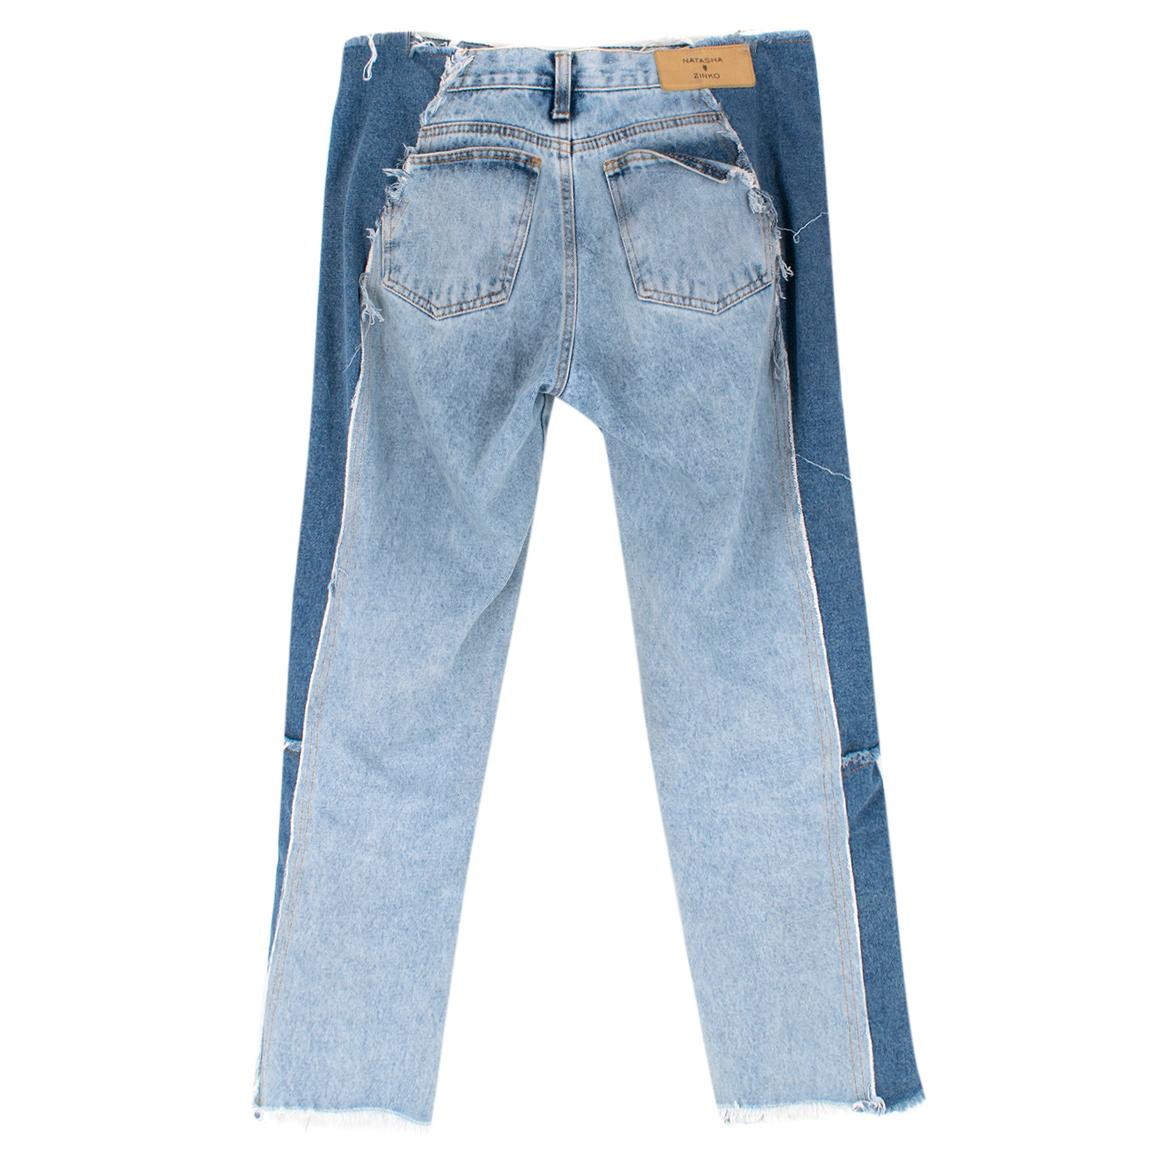 Natasha Zinko Two-Tone Distressed Cropped Jeans

- Two-tone blue denim jeans
- Cropped
- Straight cut
- Distressed
- Printed Russian script at left front pocket reading 